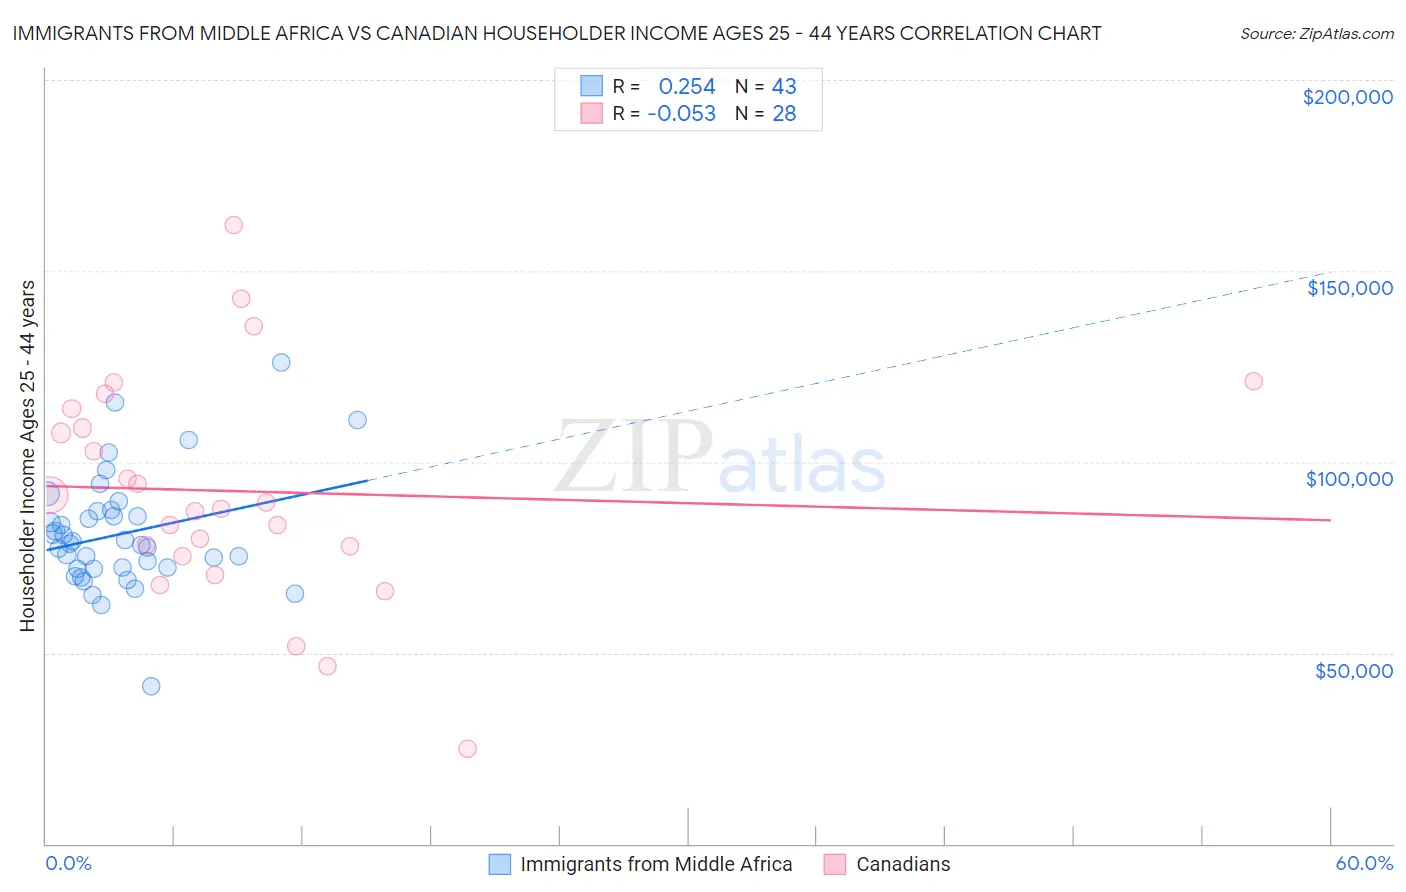 Immigrants from Middle Africa vs Canadian Householder Income Ages 25 - 44 years